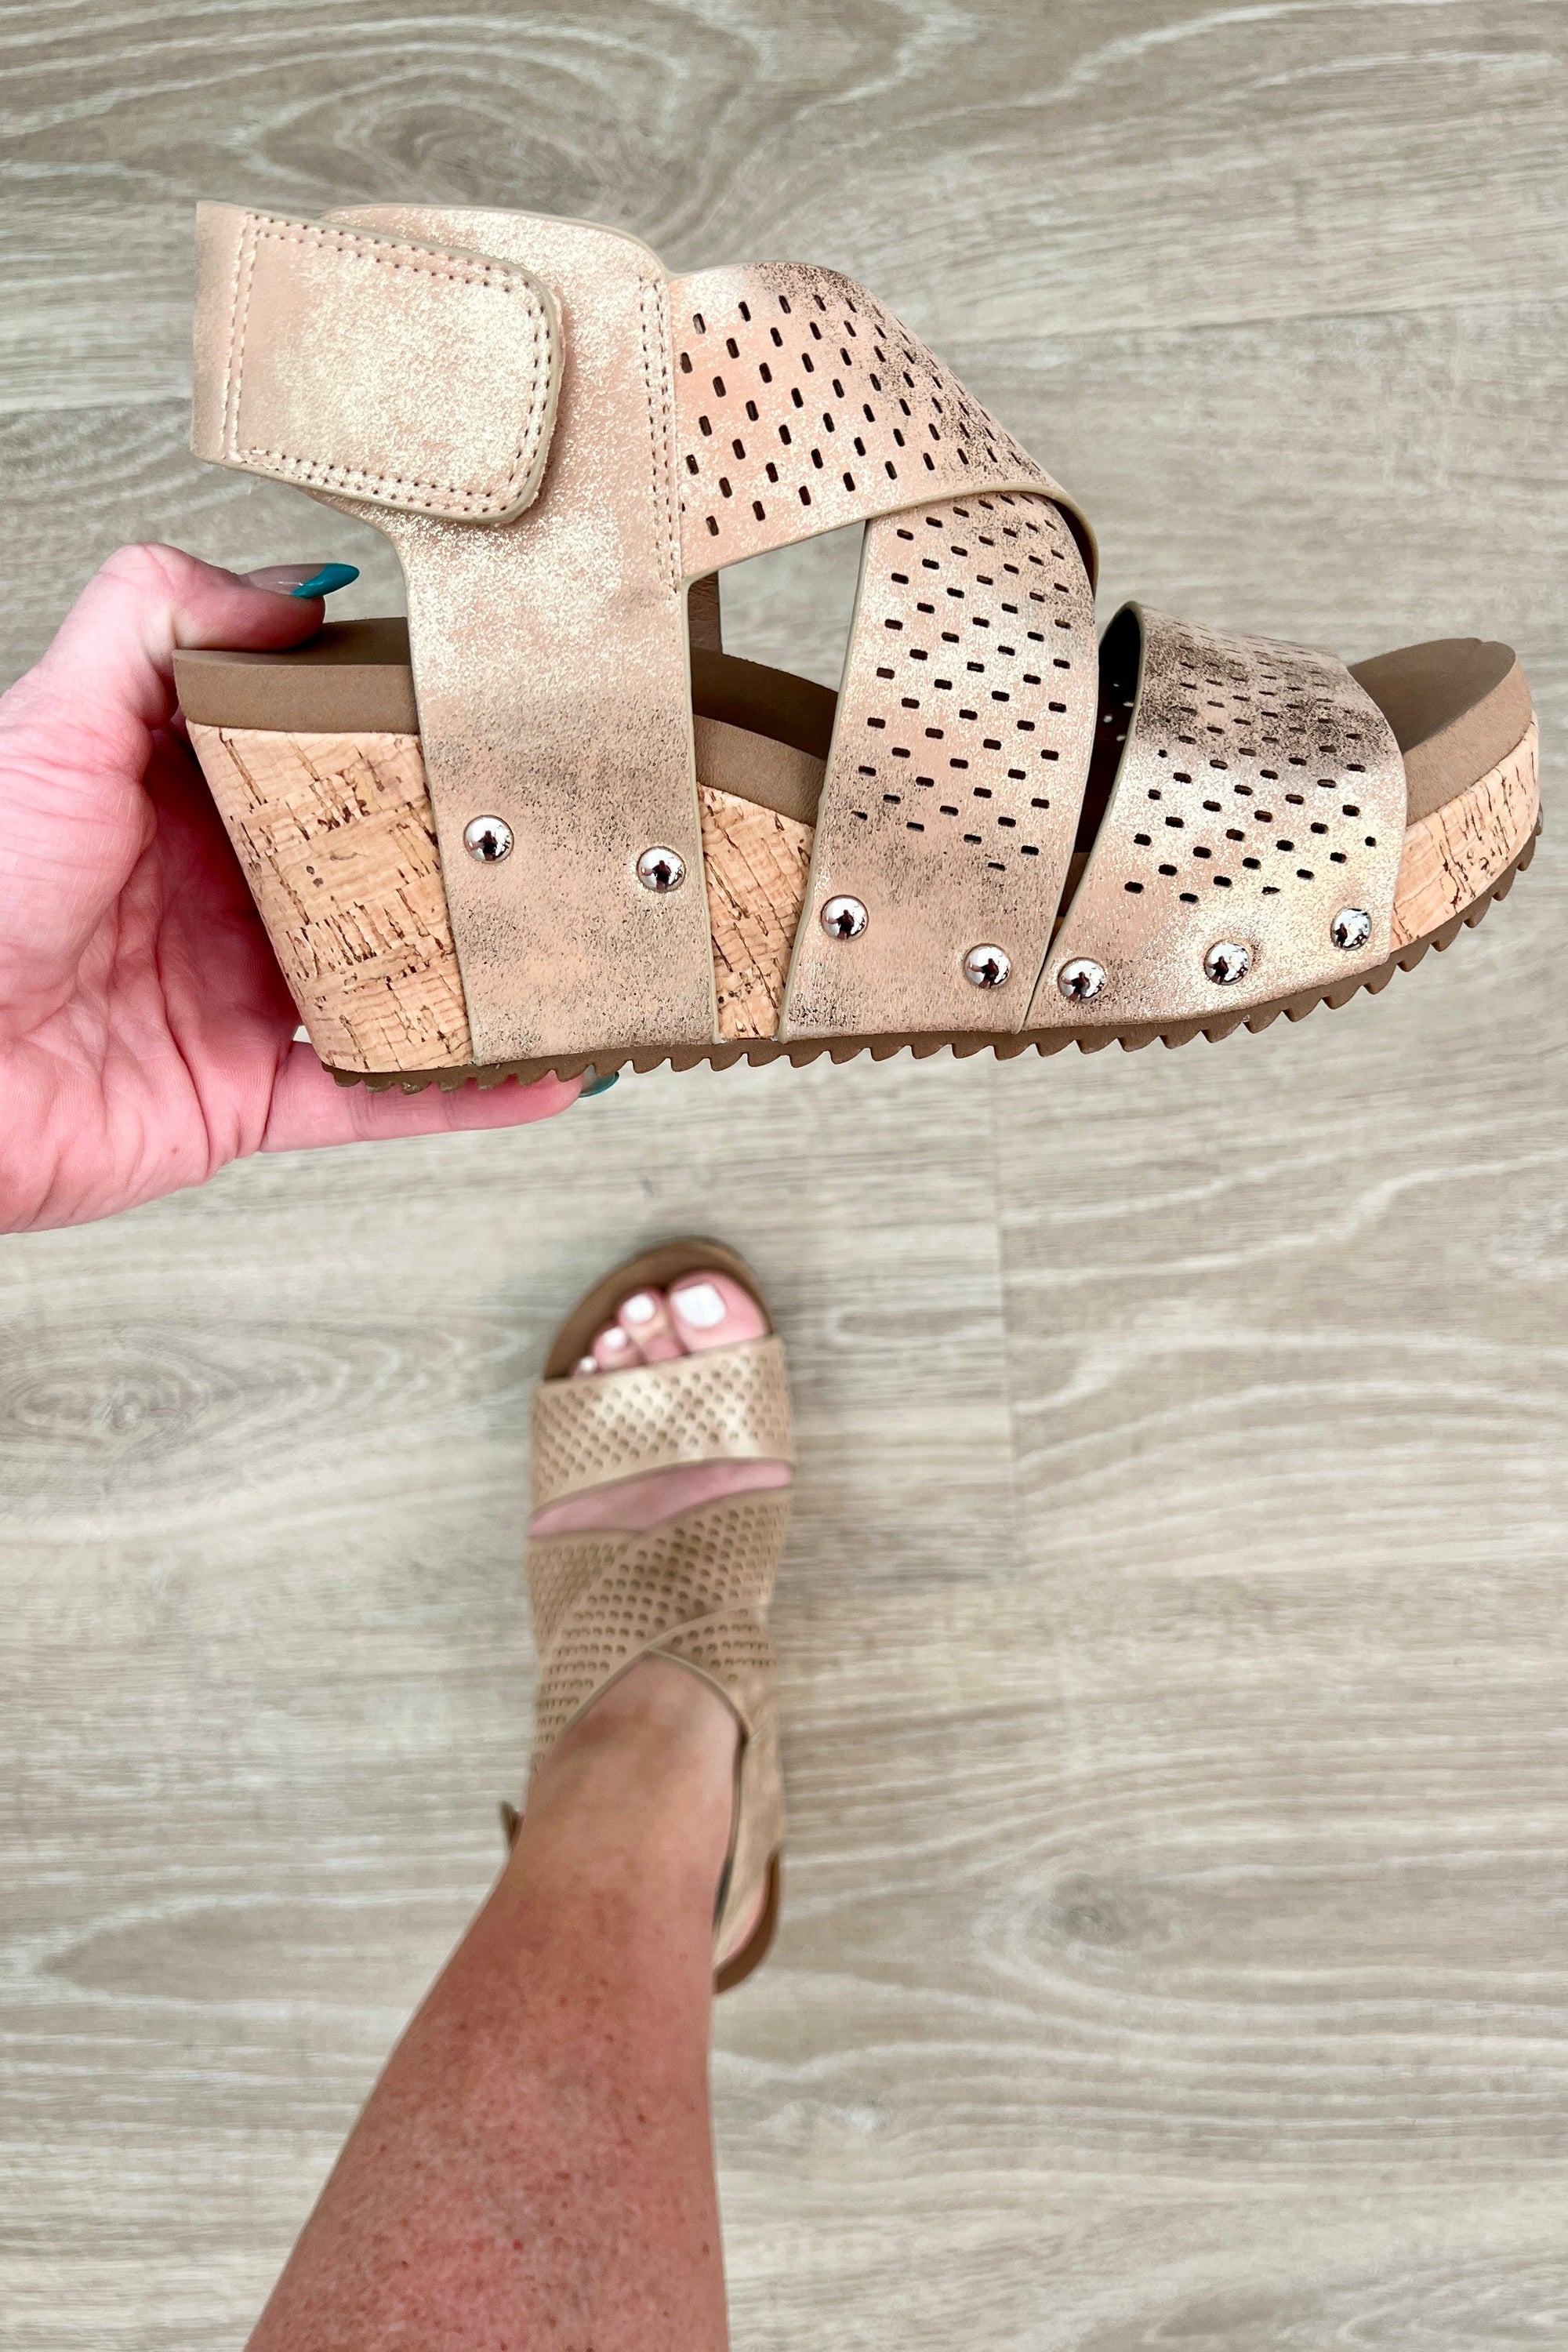 The Holy Grail Wedge Shoes